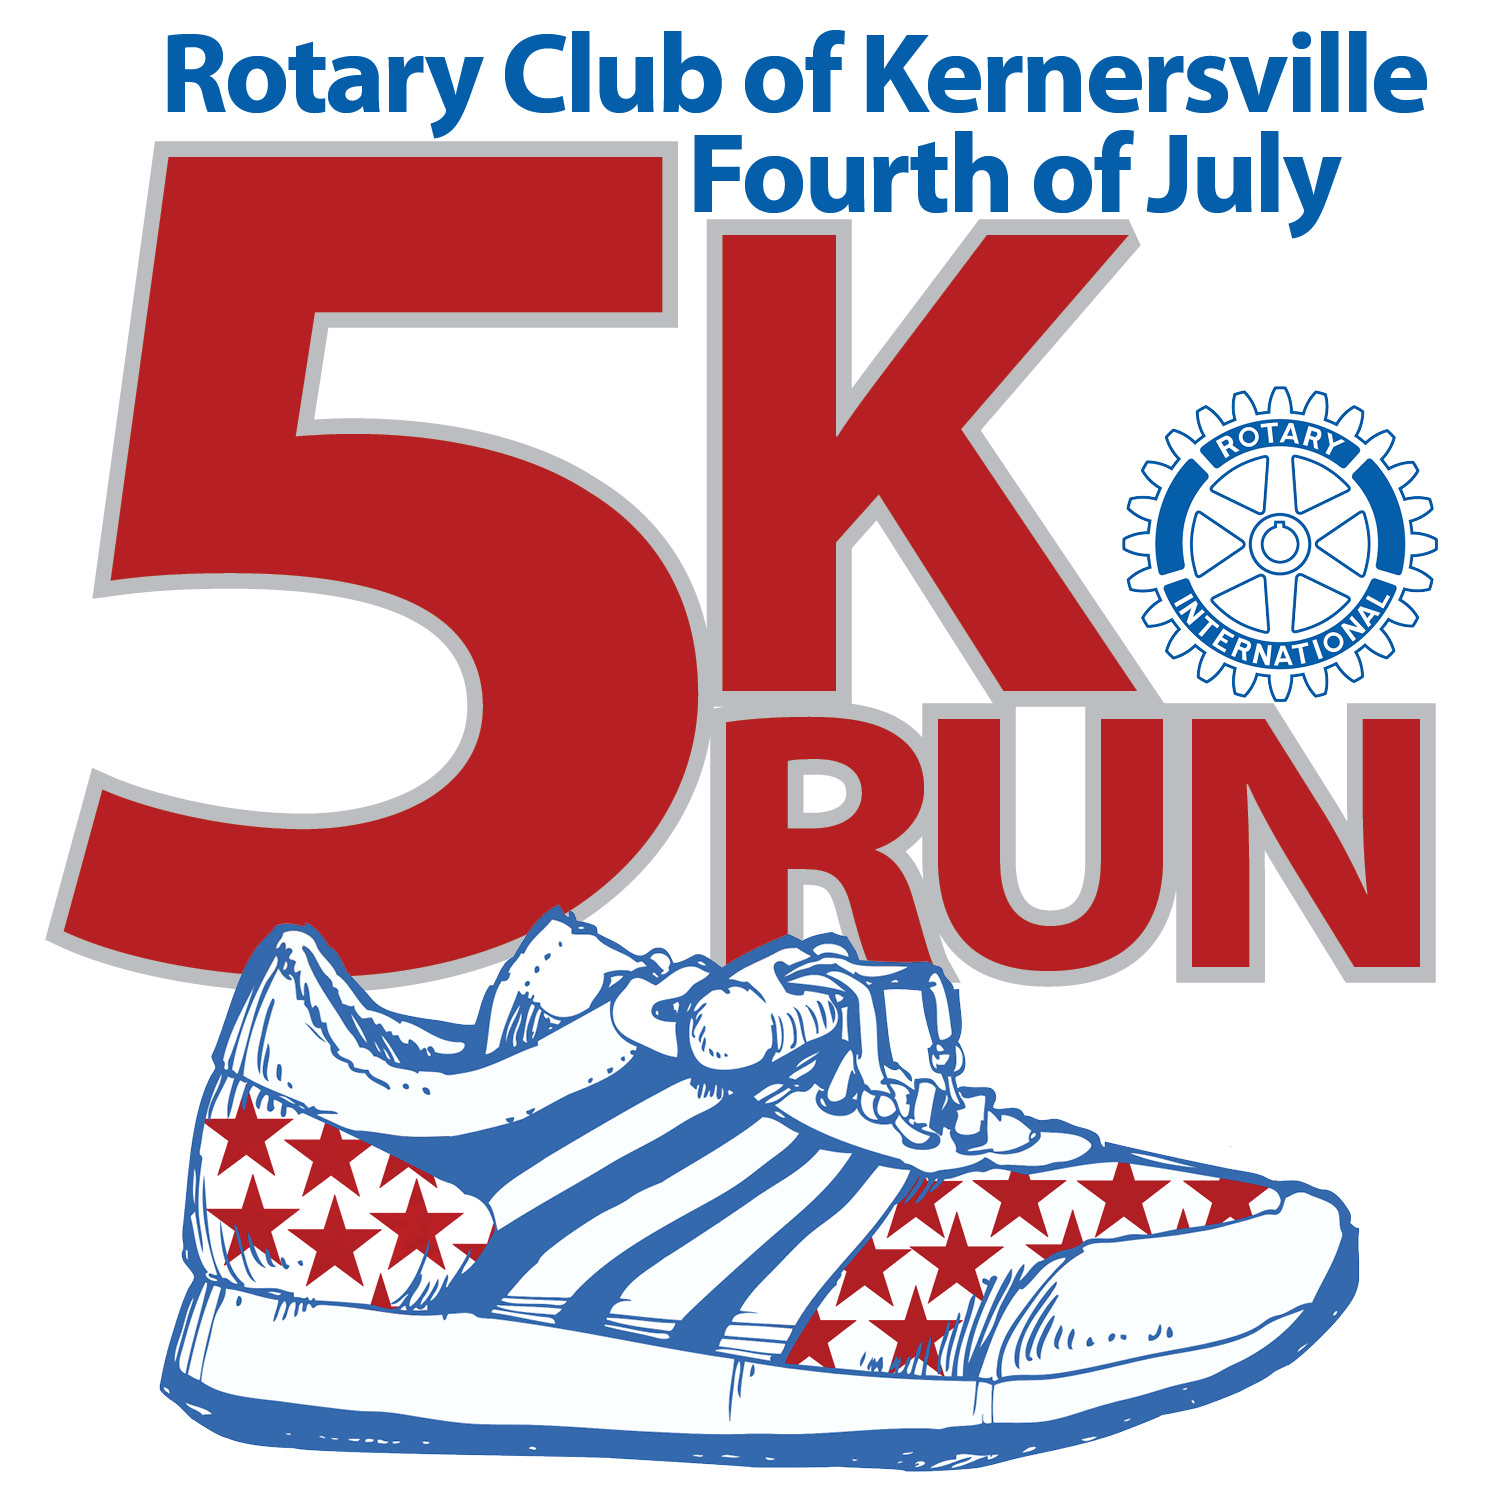 Rotary Club of Kernersville Fourth of July 5k